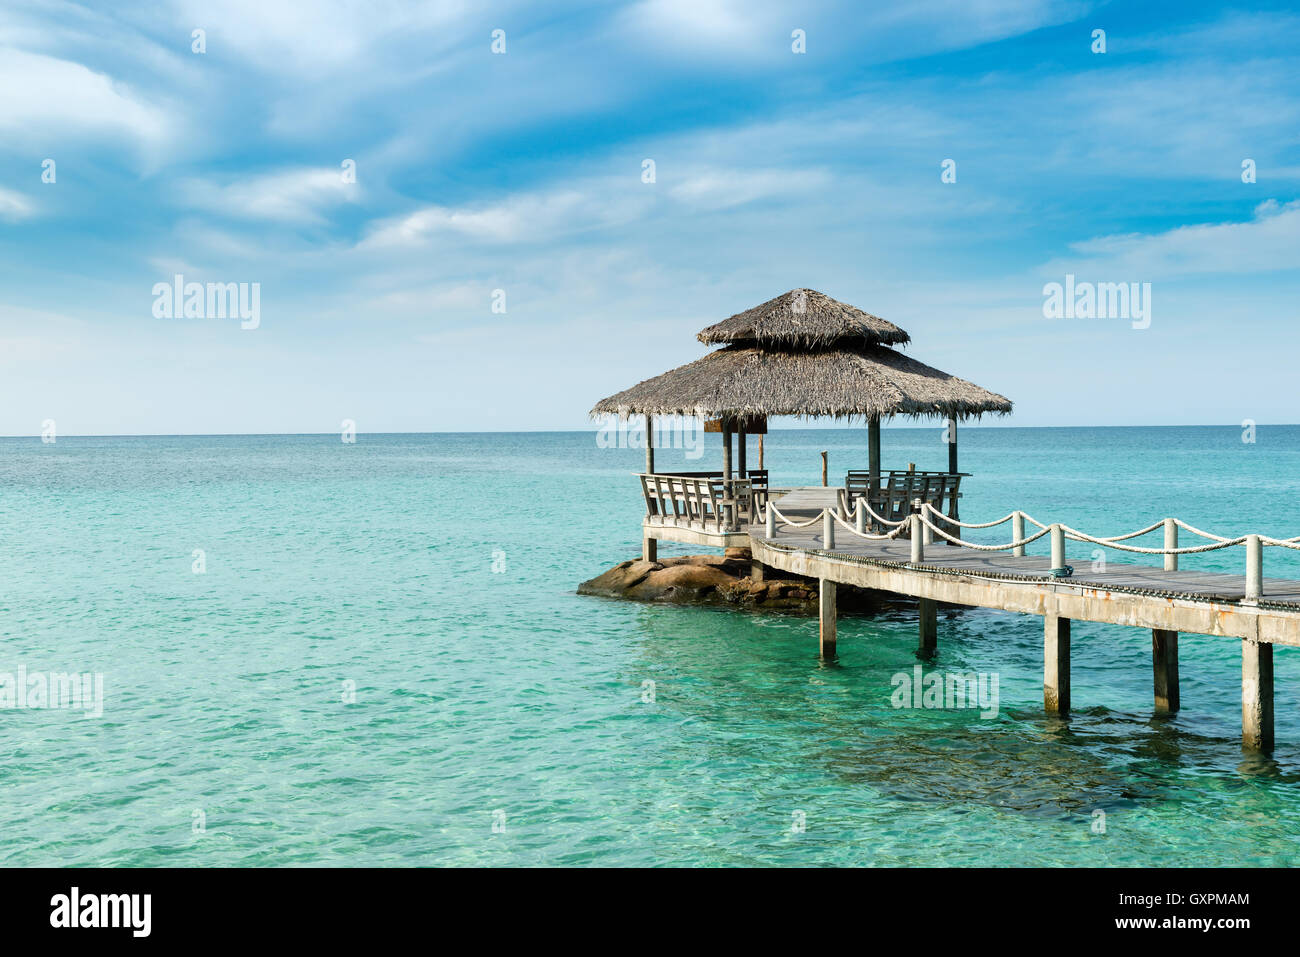 Summer, Travel, Vacation and Holiday concept - Wooden pier in Phuket, Thailand. Stock Photo